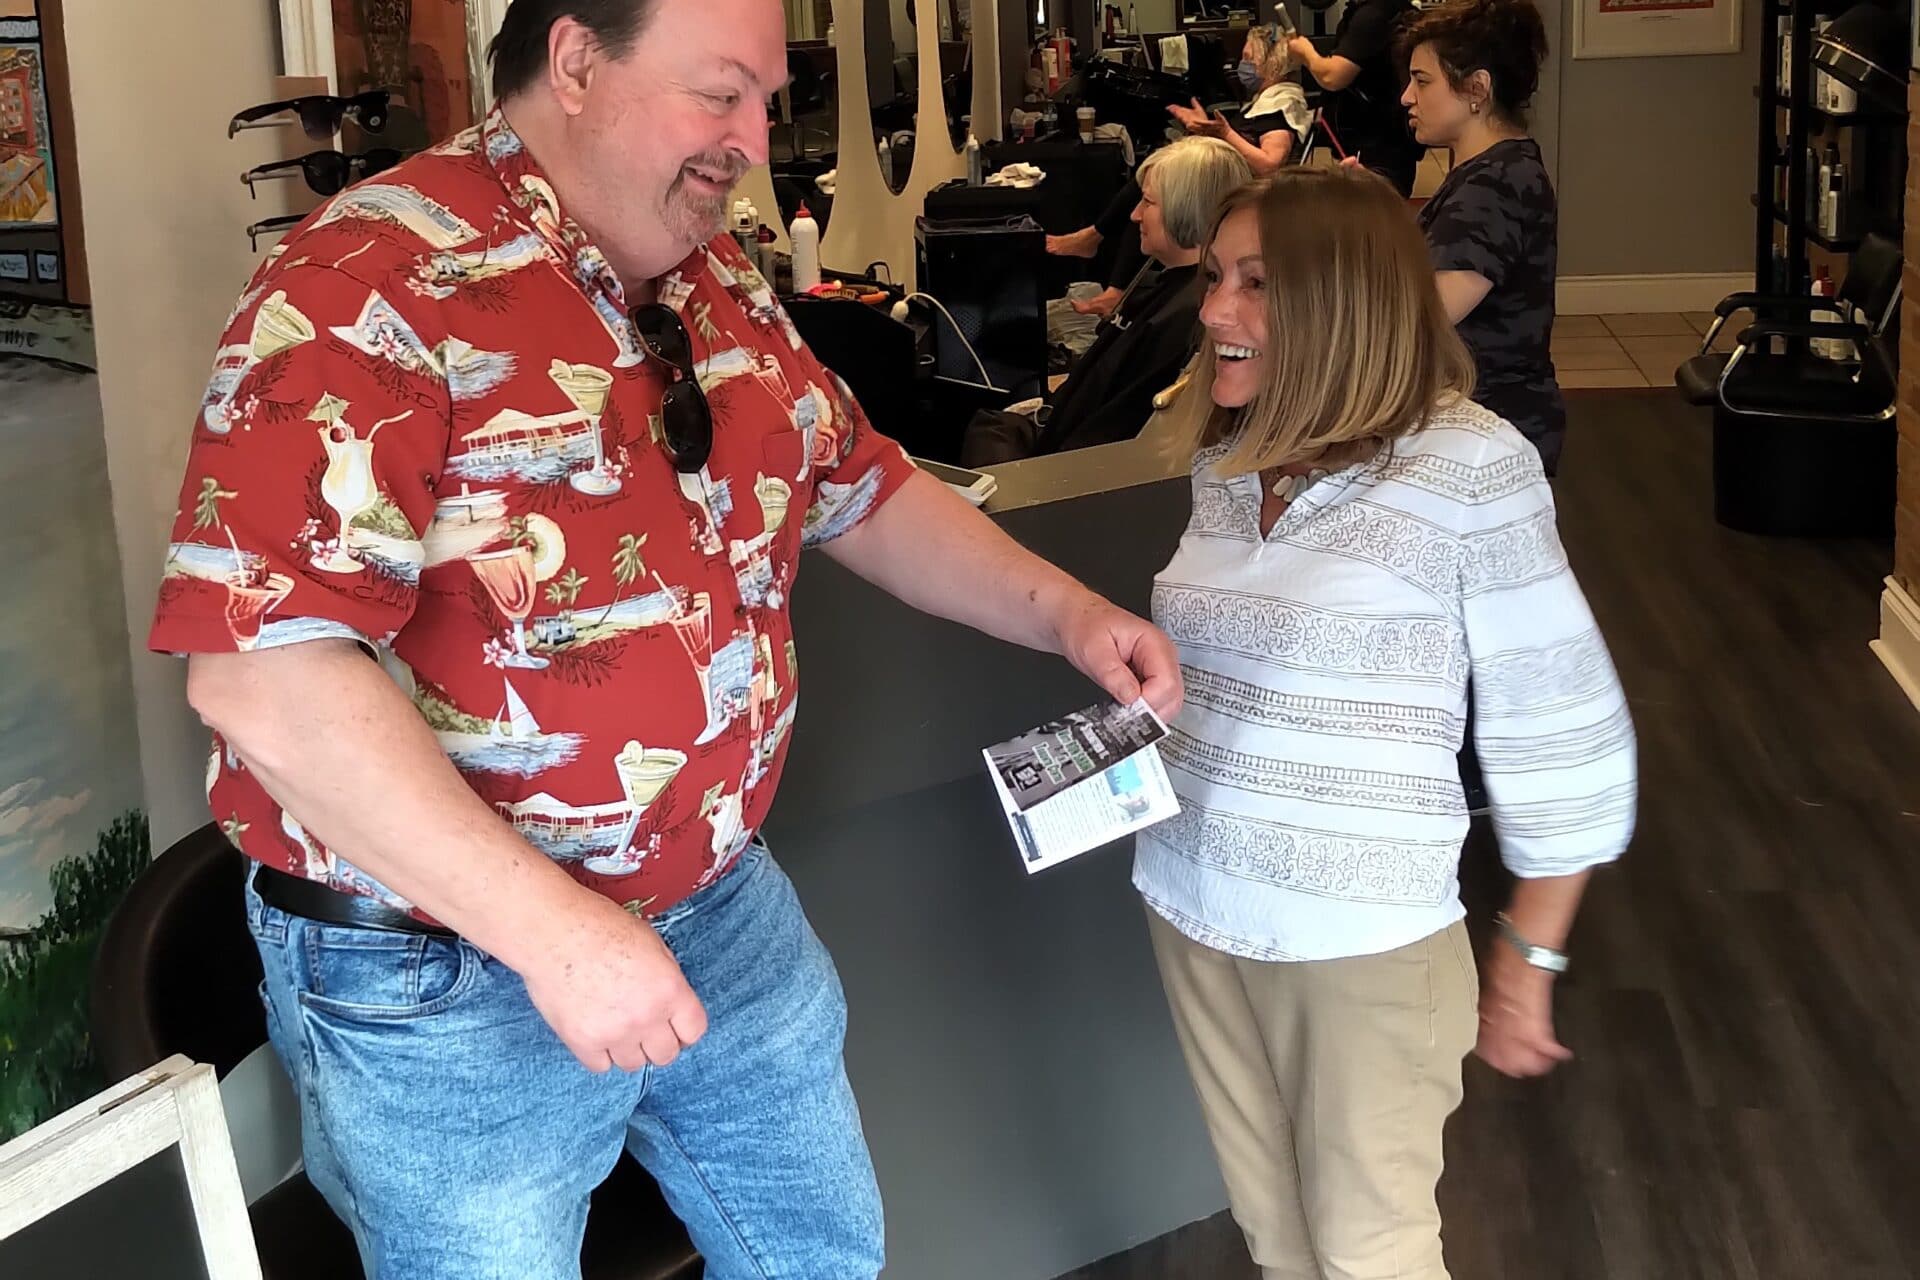 A man in a red shirt and blue jeans gives a flyer to a persn wearing a white and grey shirt and beige pants.